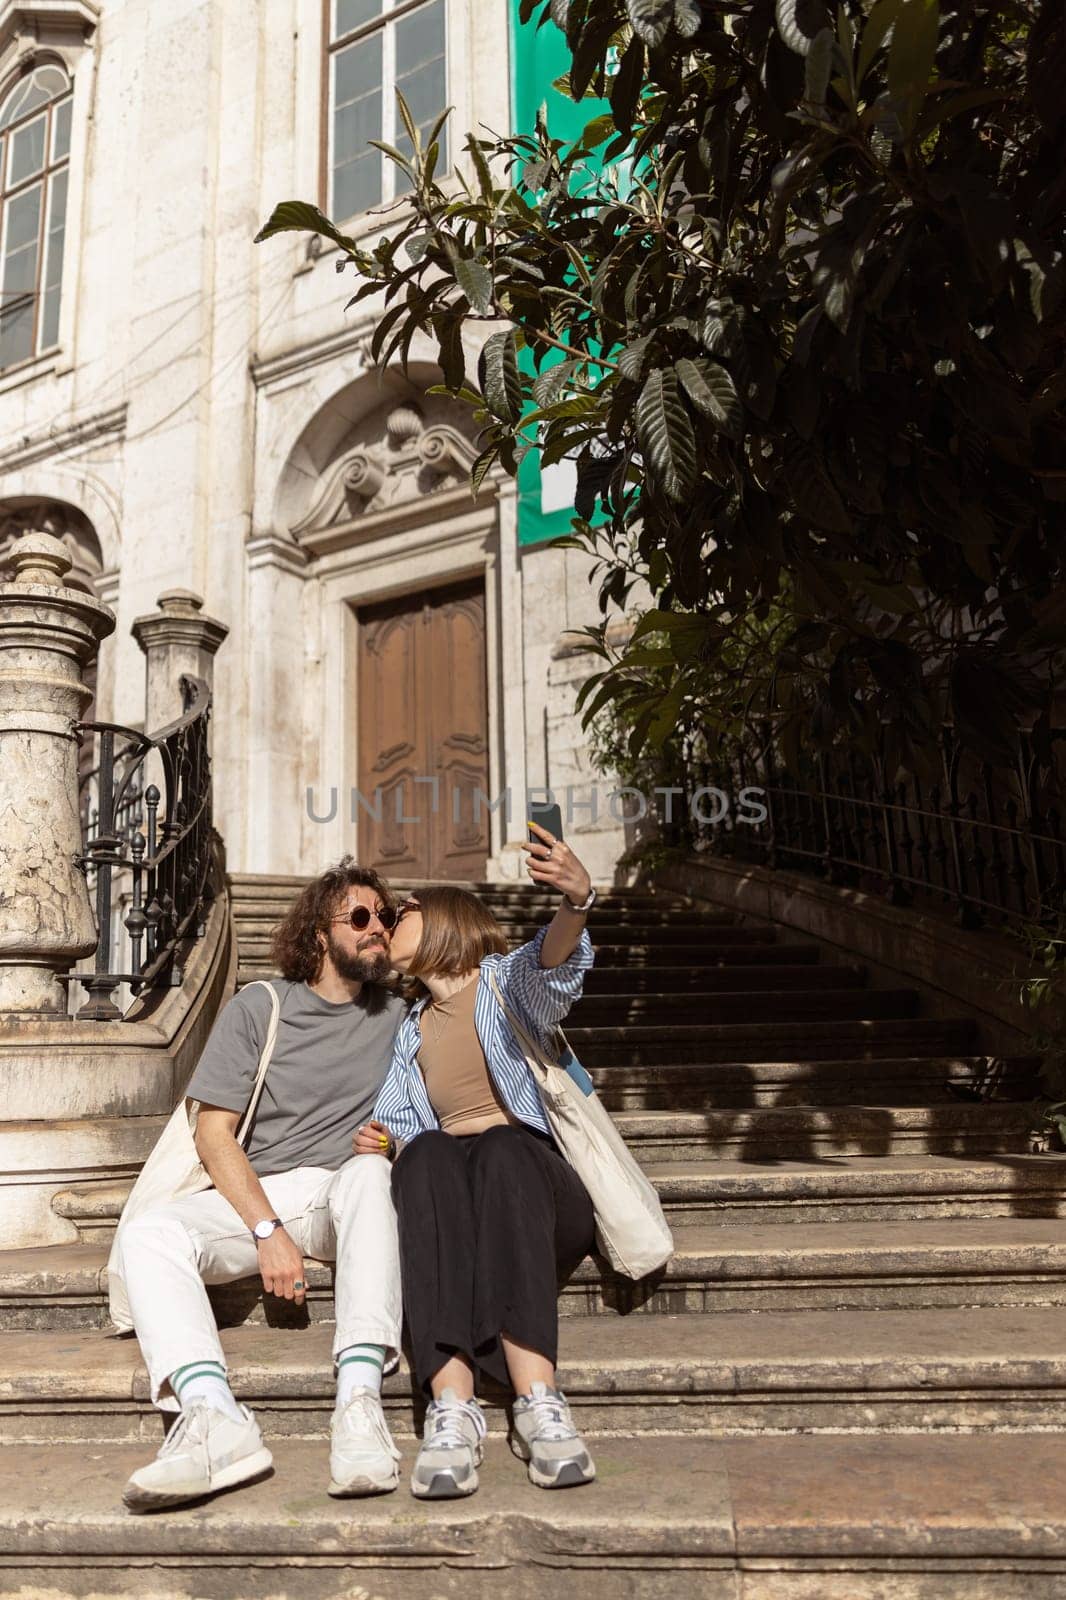 Romantic couple in love sitting stairs on old city street and making selfie on phone by Yaroslav_astakhov